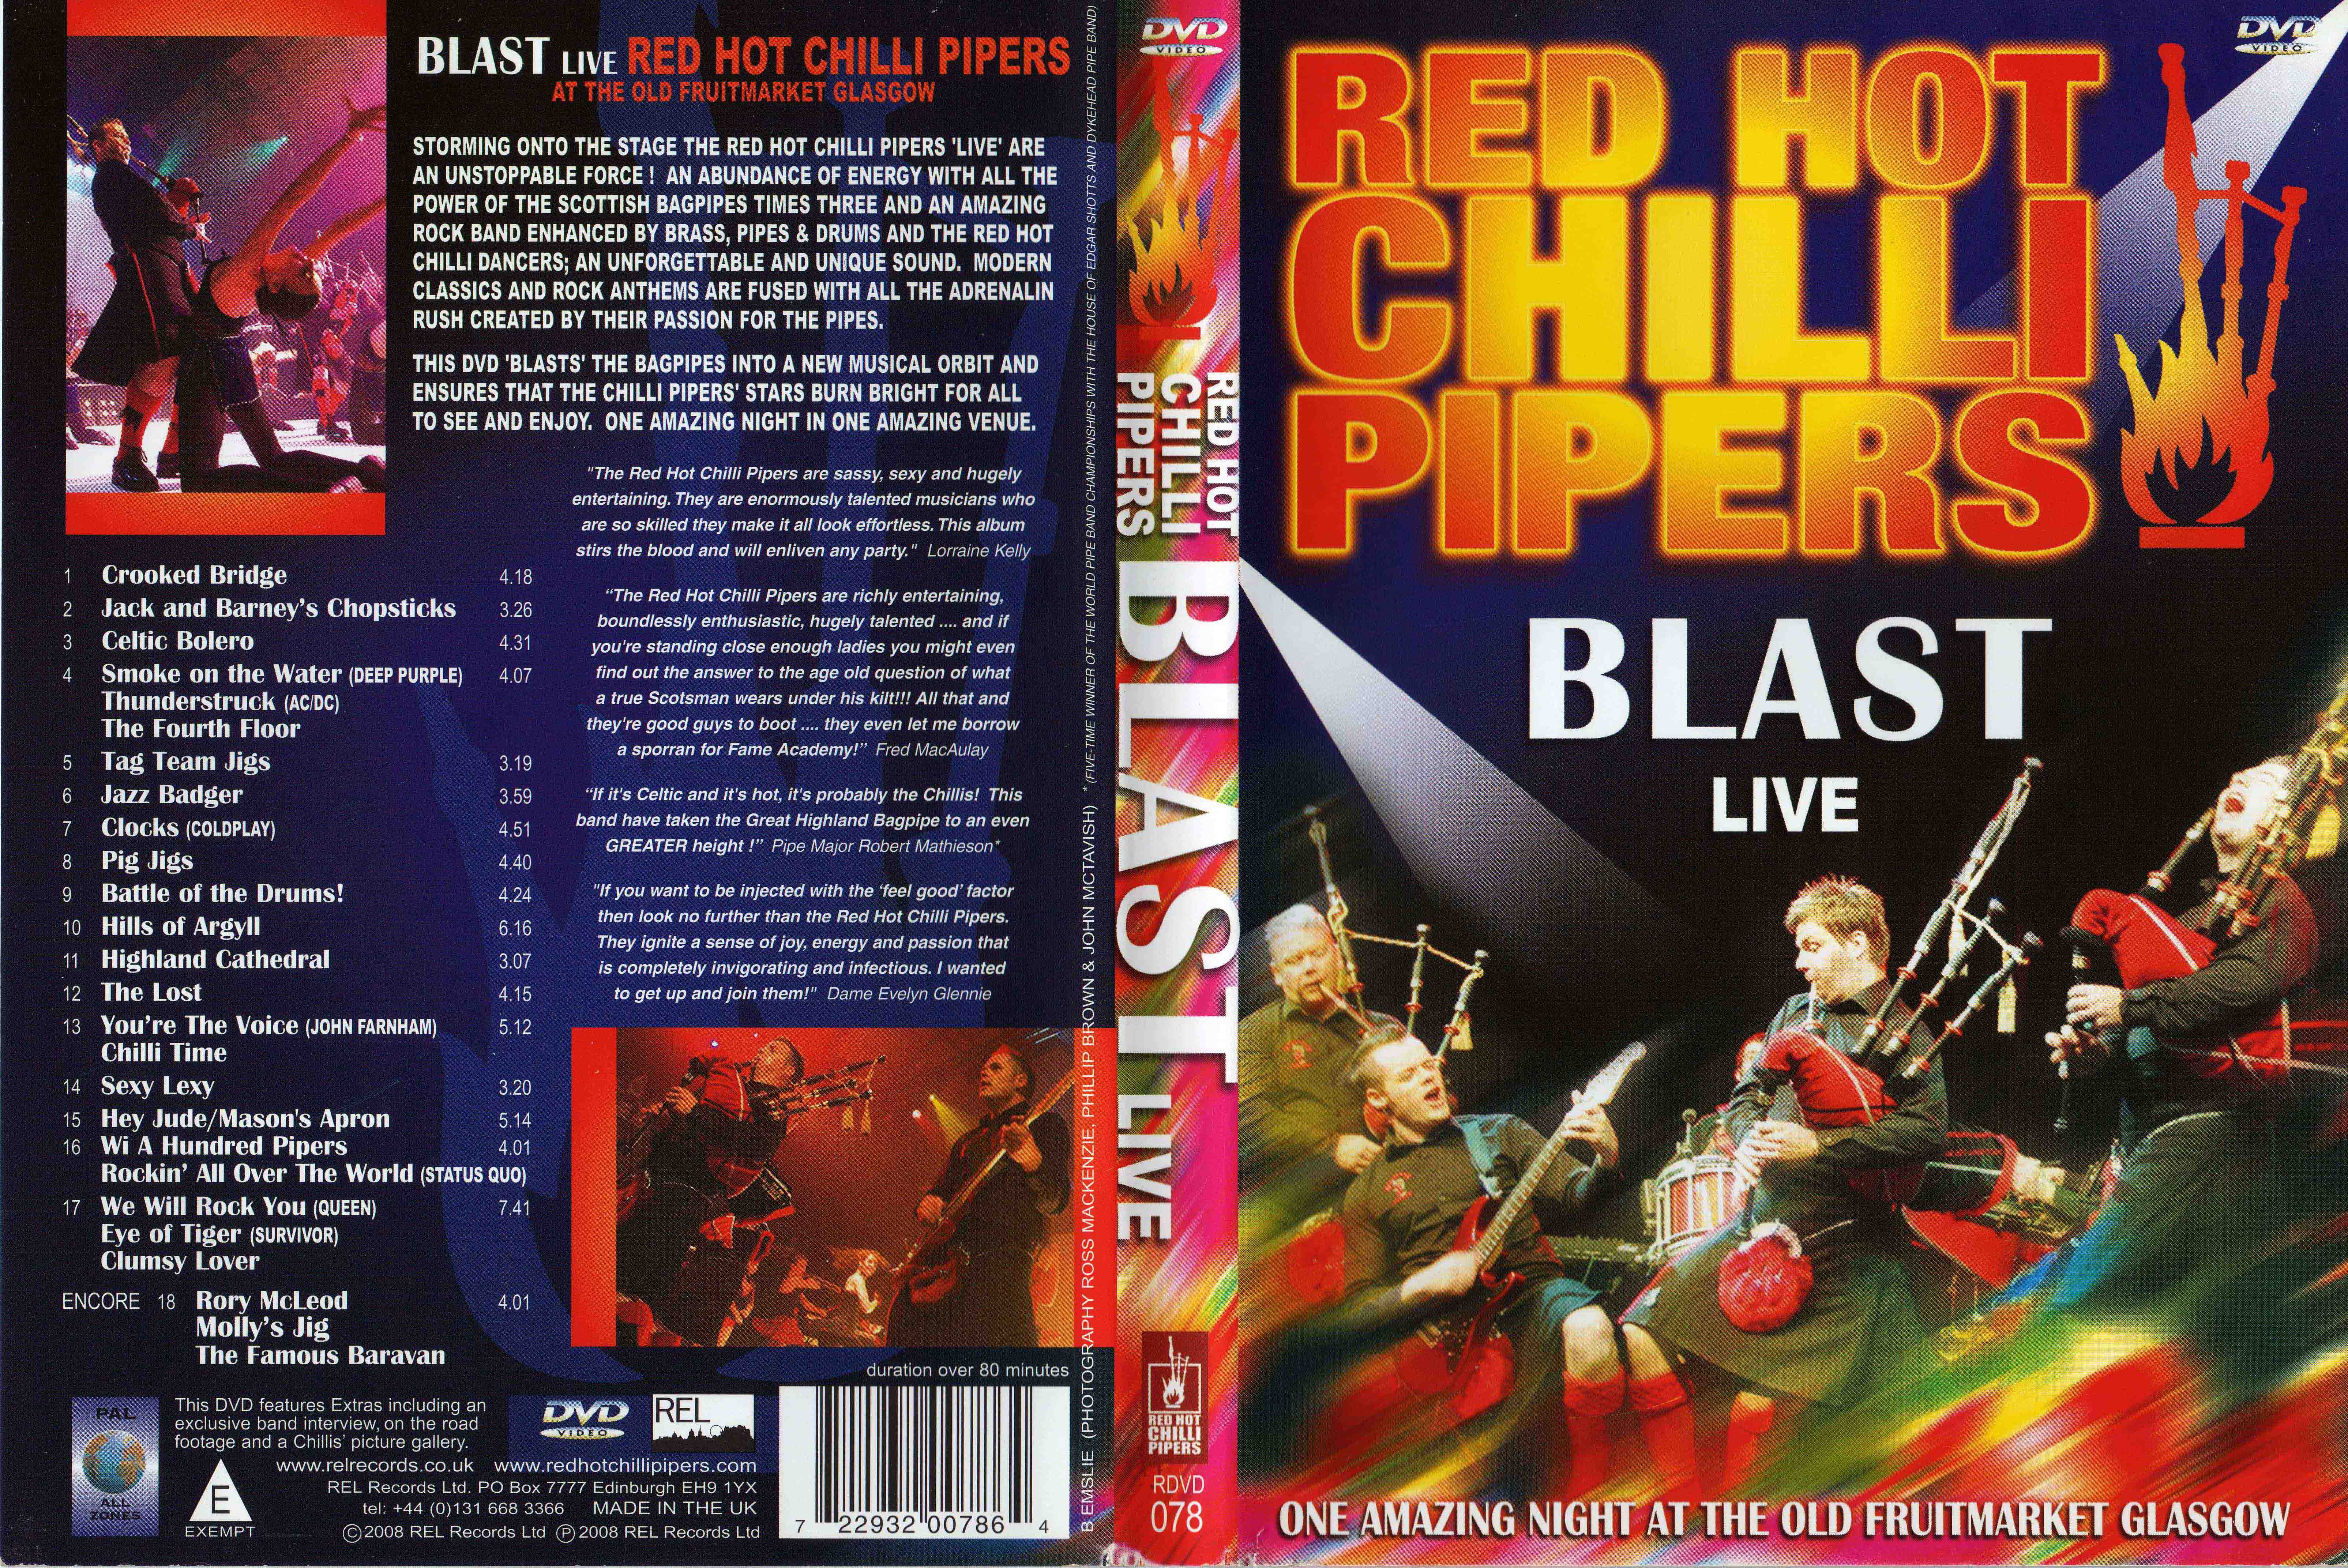 Jaquette DVD Red Hot Chilli Pipers - Blast Live